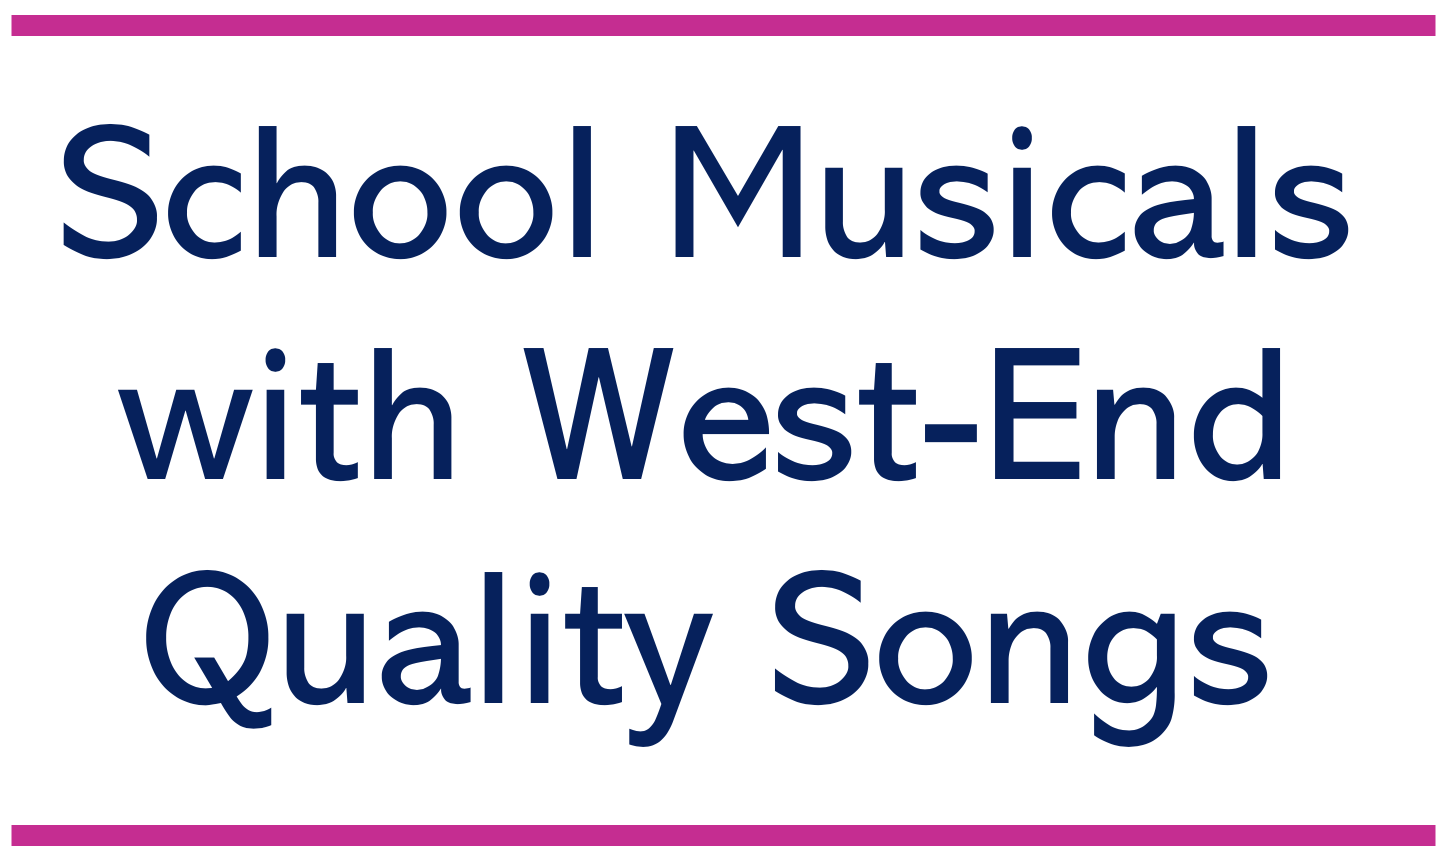 School Musicals with West-End Quality Songs - Limelight Musicals